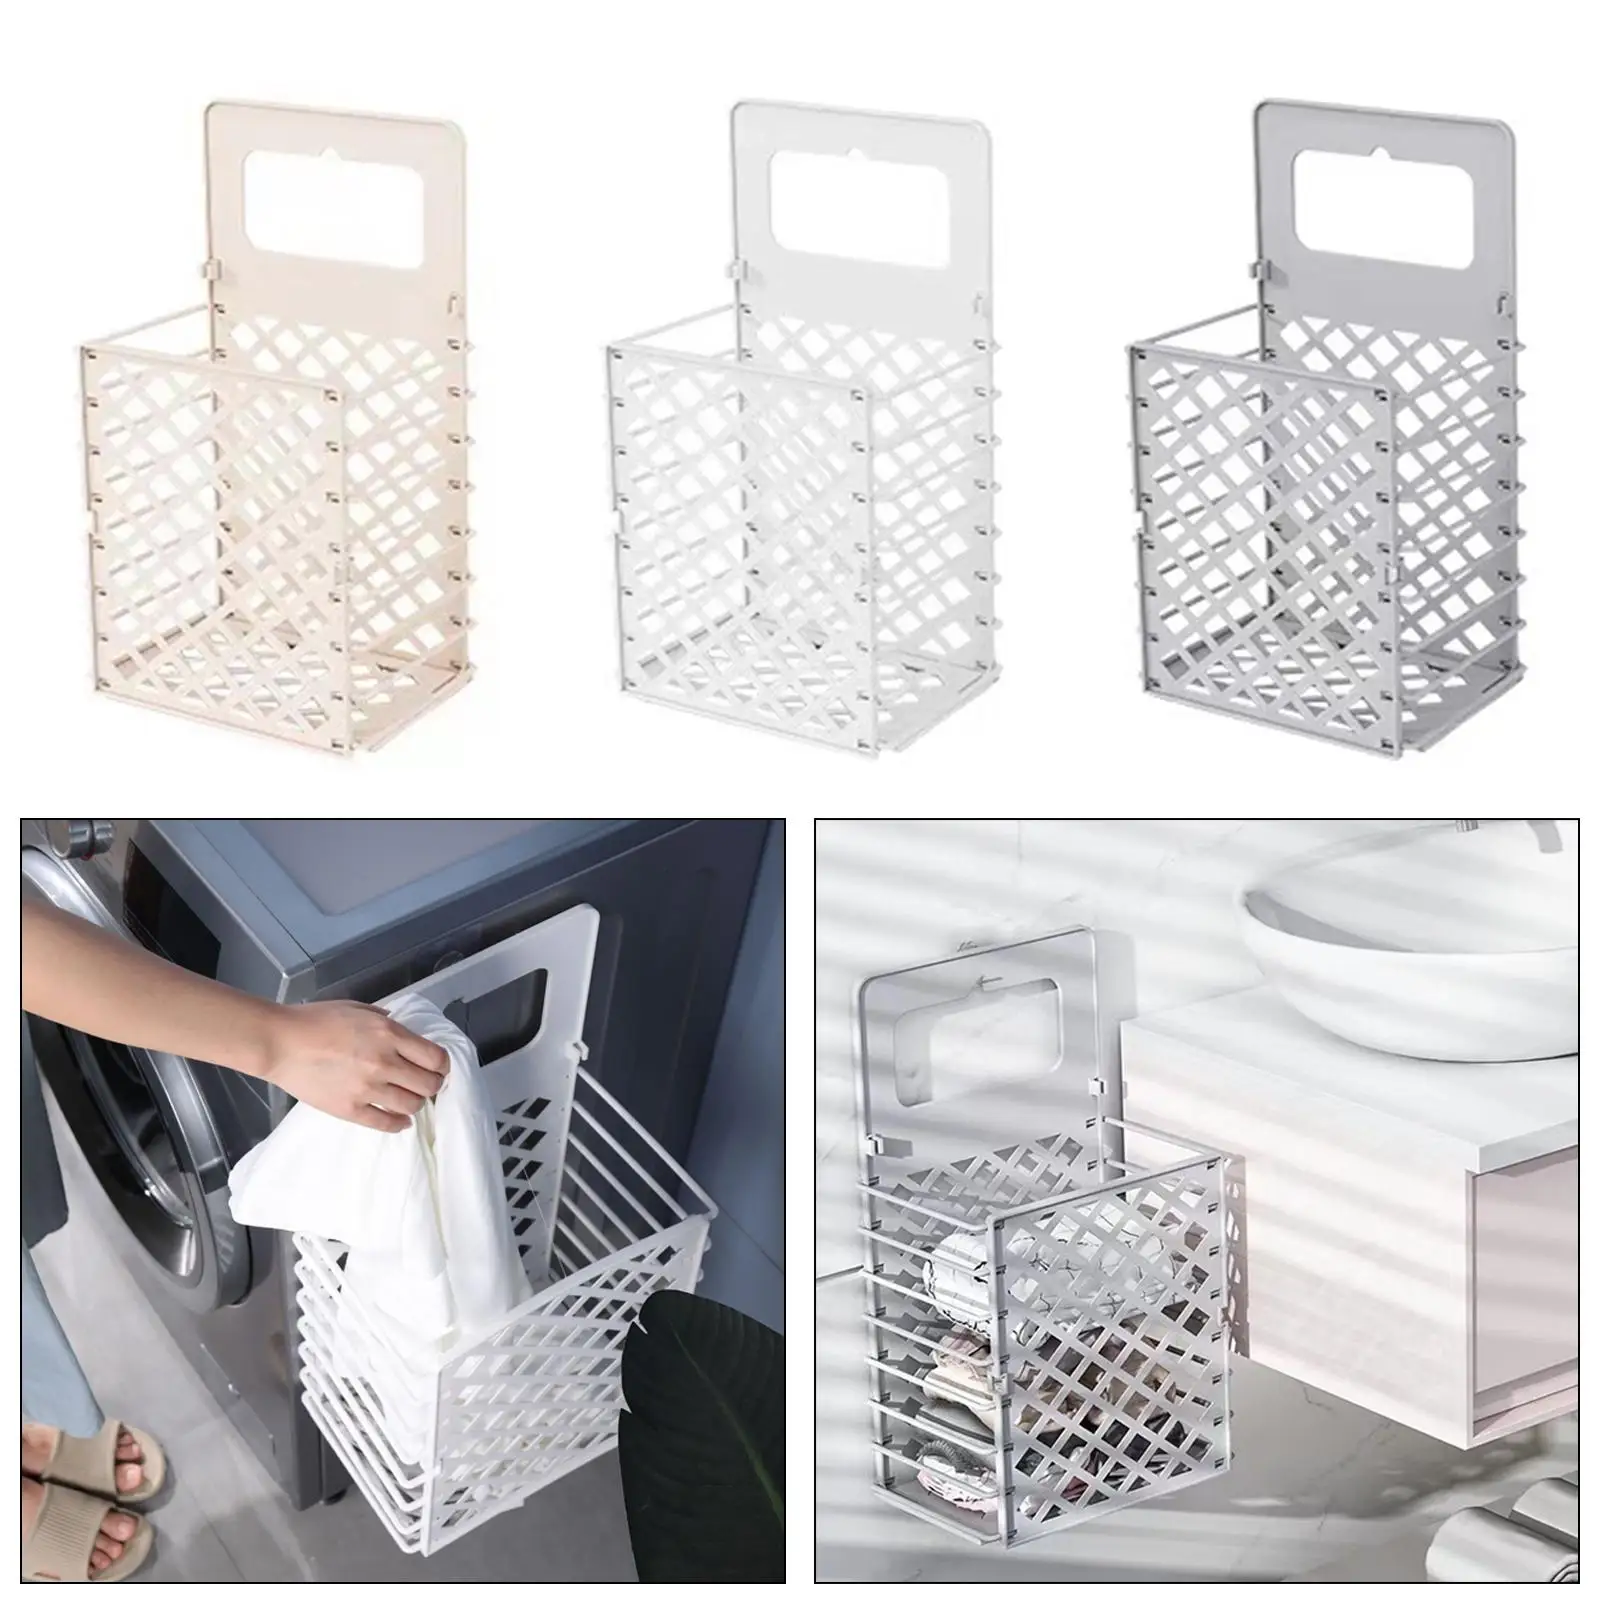 Collapsible Laundry Hamper Laundry Room Clothing Organizer Sundries Storage Bins Holder Laundry Basket for Bedroom Household